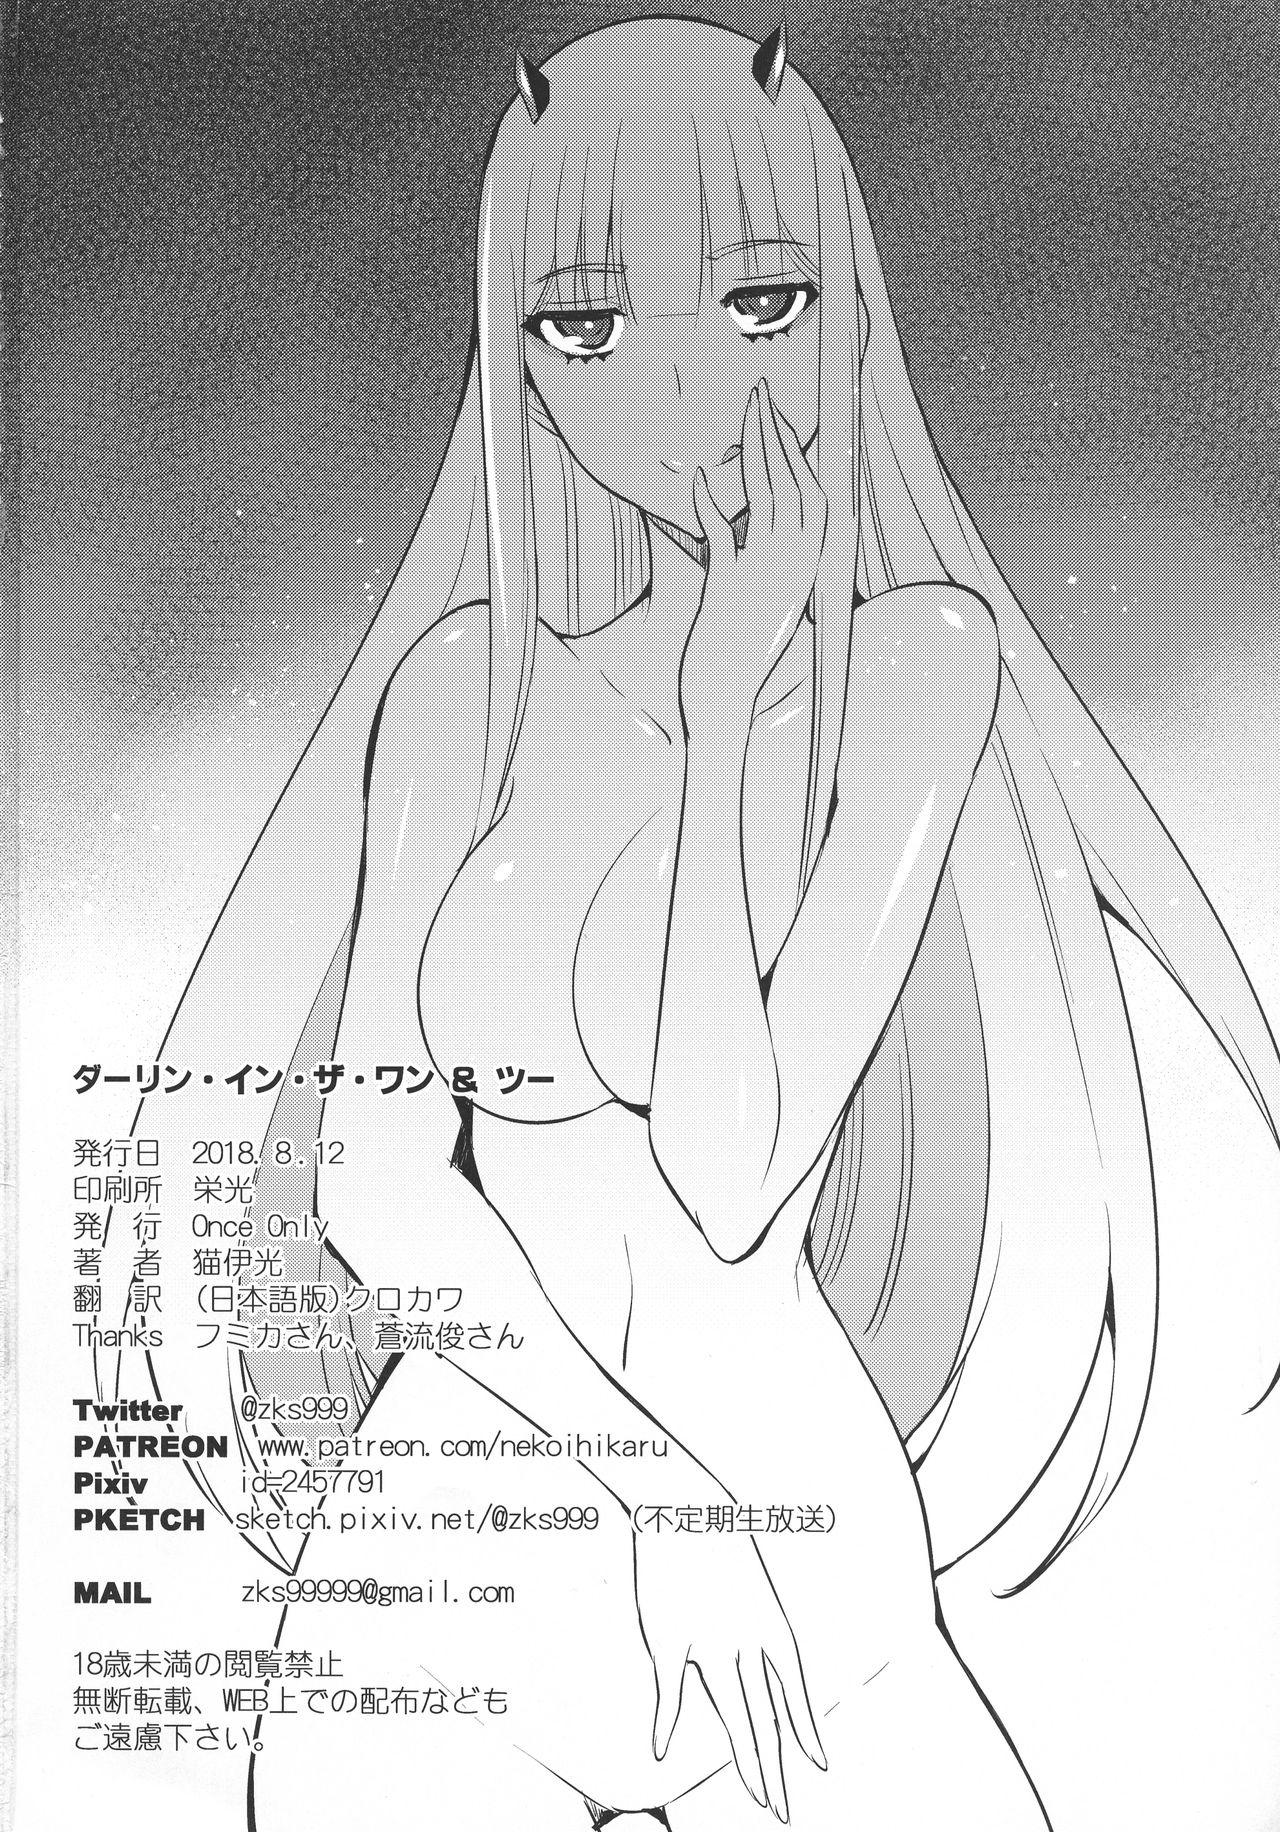 Gaysex Darling in the One and Two - Darling in the franxx Horny Slut - Page 17